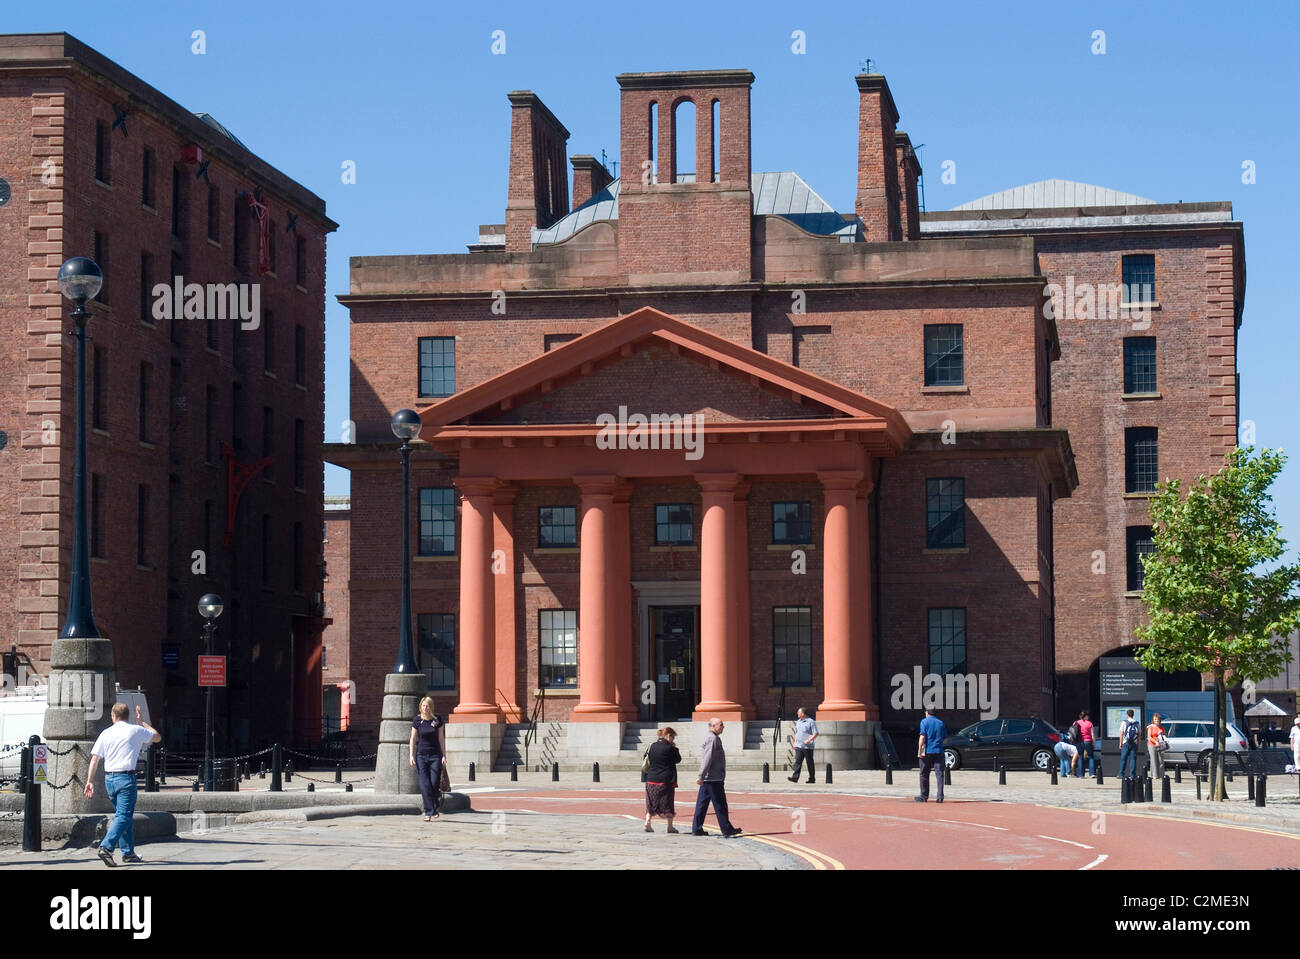 Historic building as part of the renovated Albert Docks, Liverpool, Merseyside, England Stock Photo